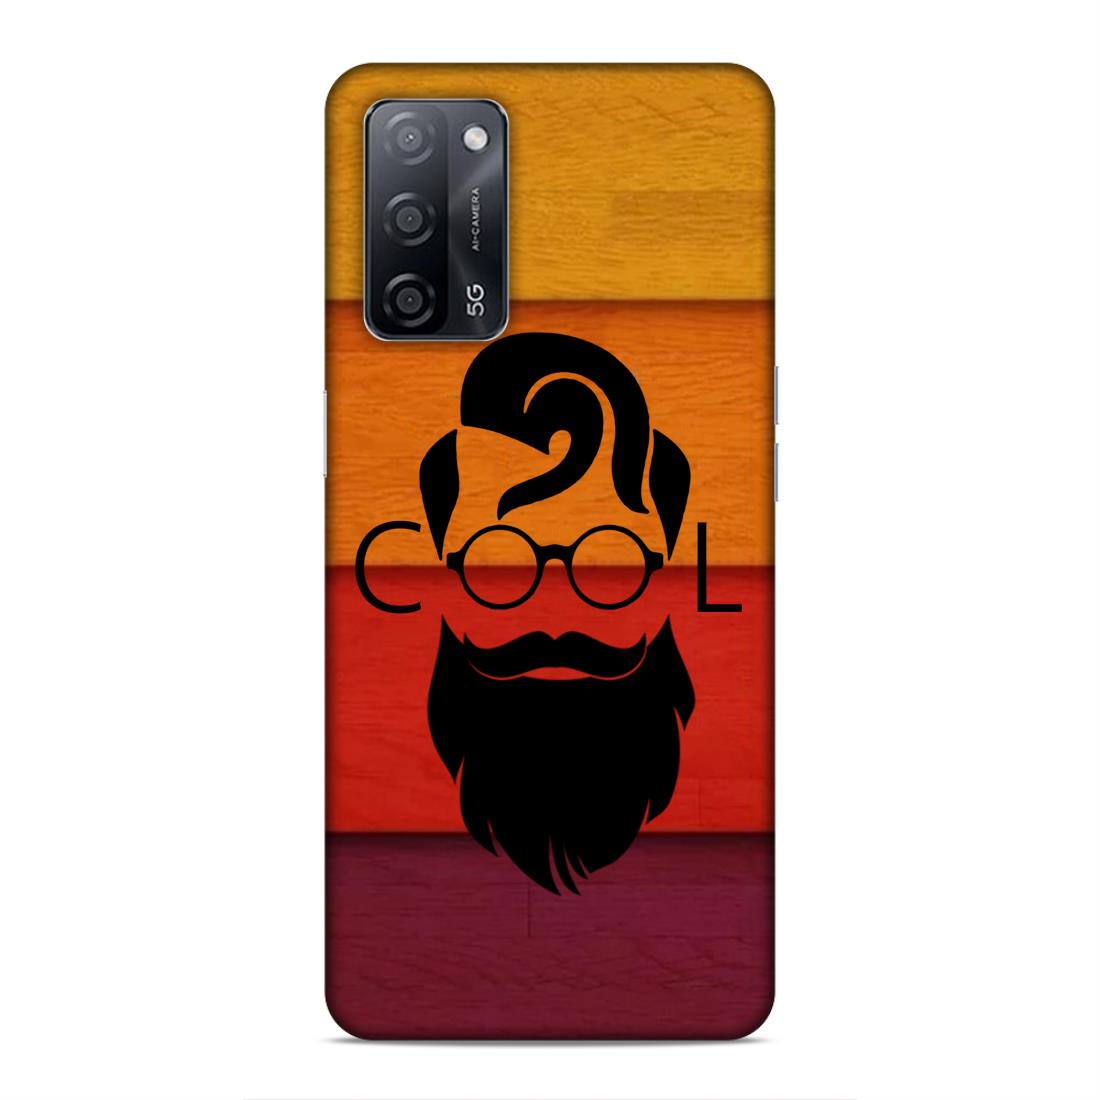 Cool Beard Man Hard Back Case For Oppo A53s 5G / A55 5G / A16